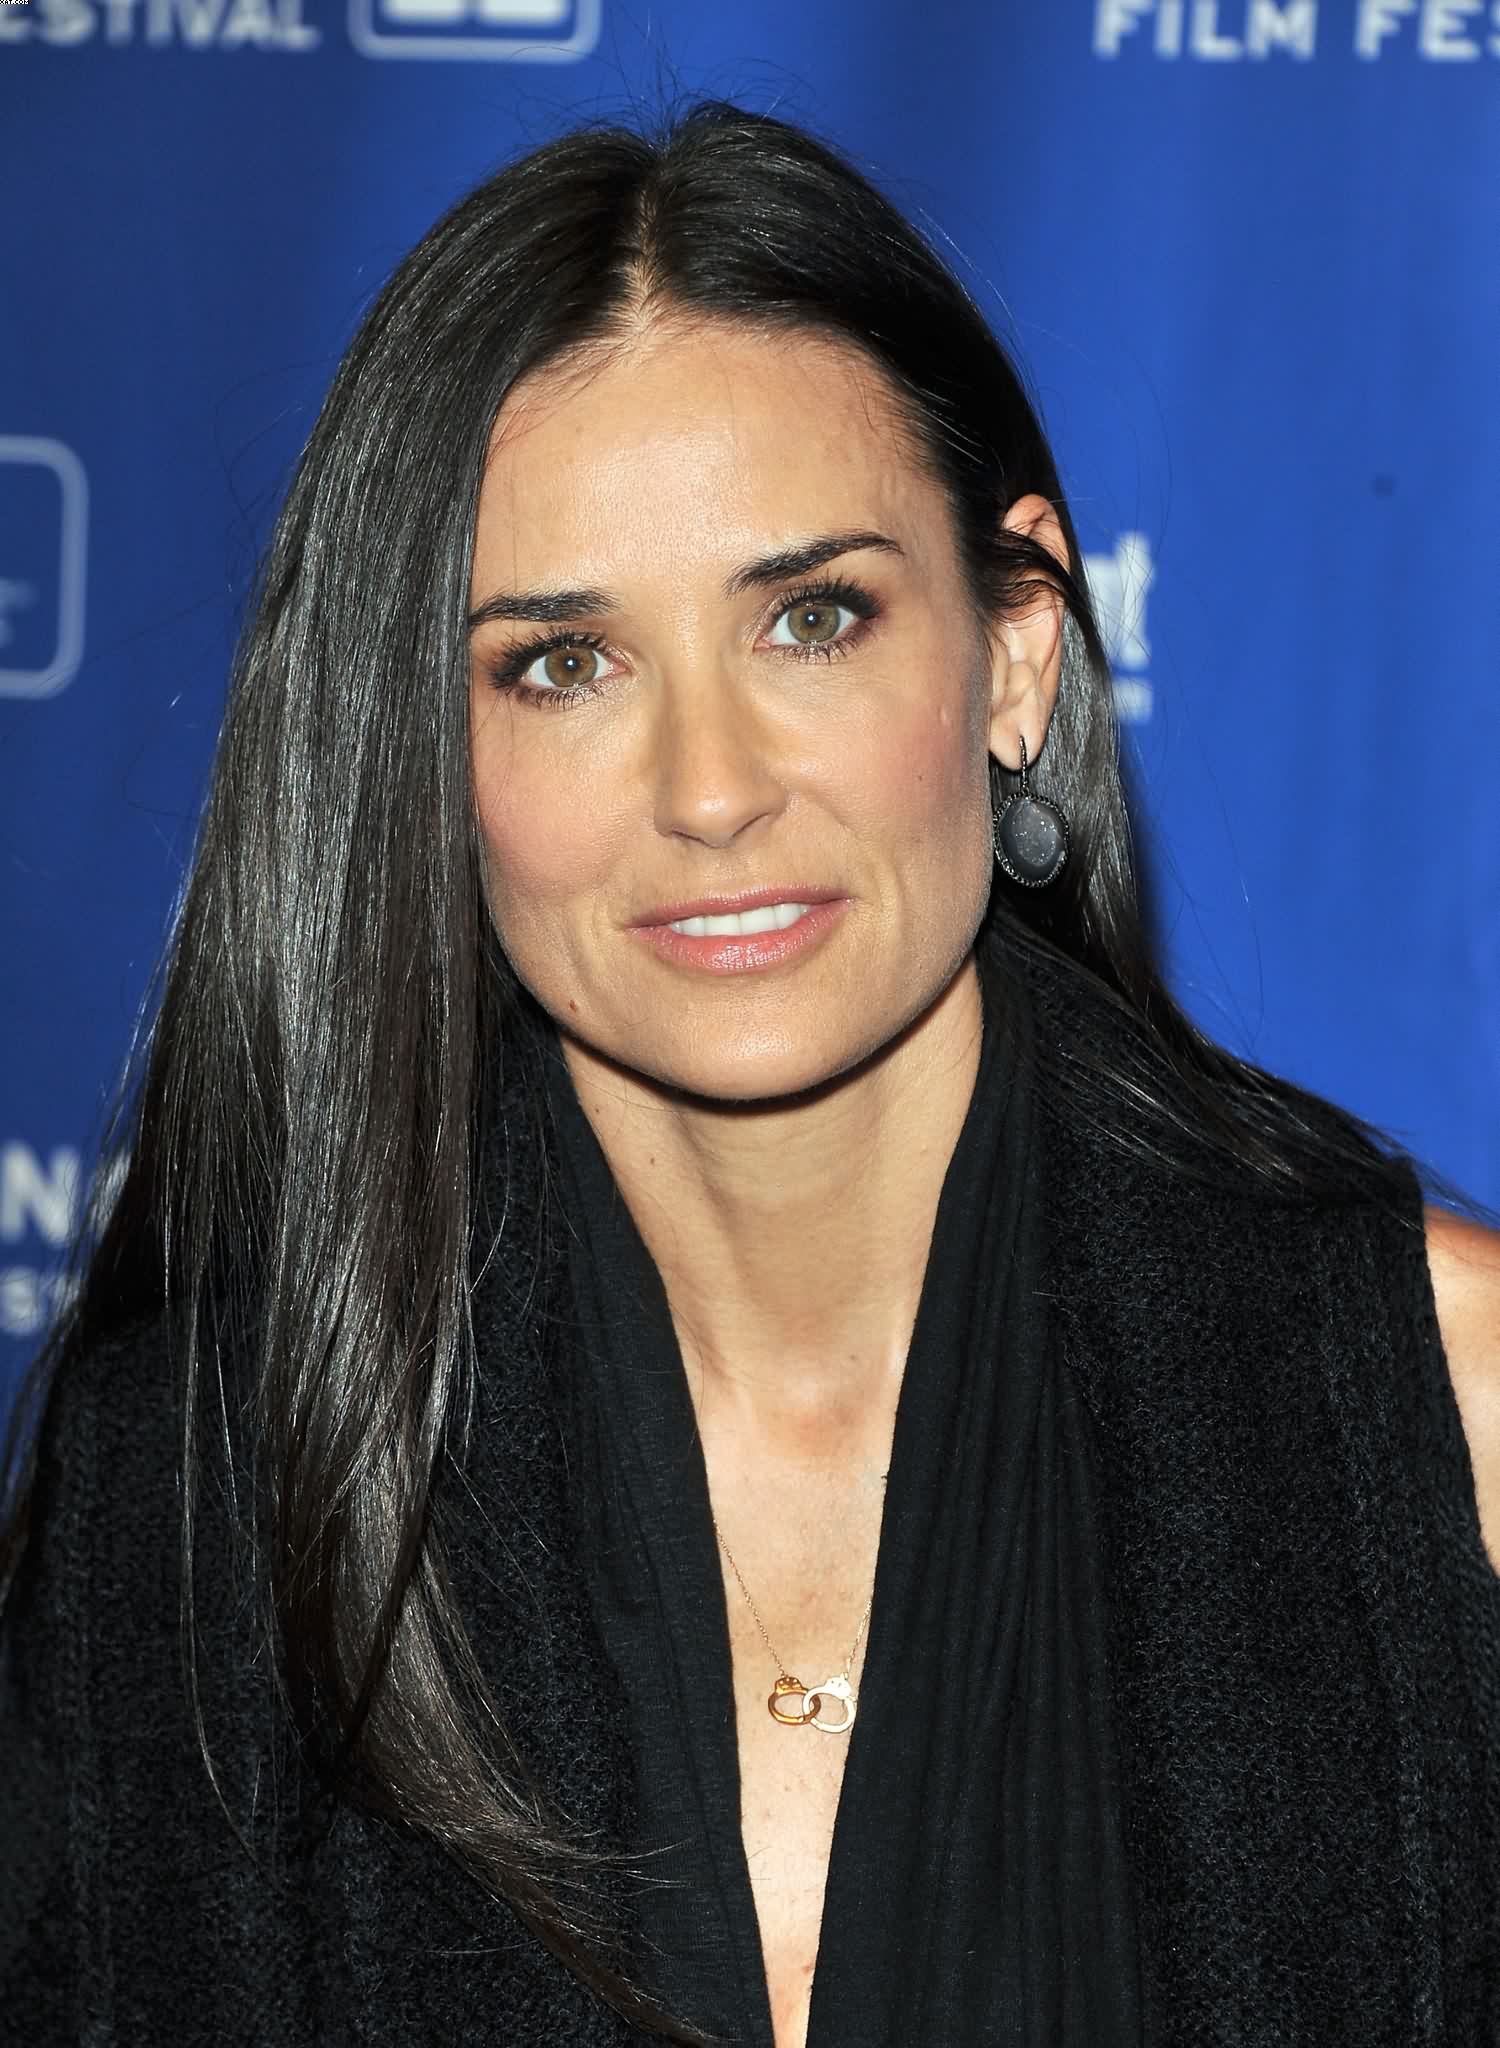 Demi moore full bush and shaved – Telegraph